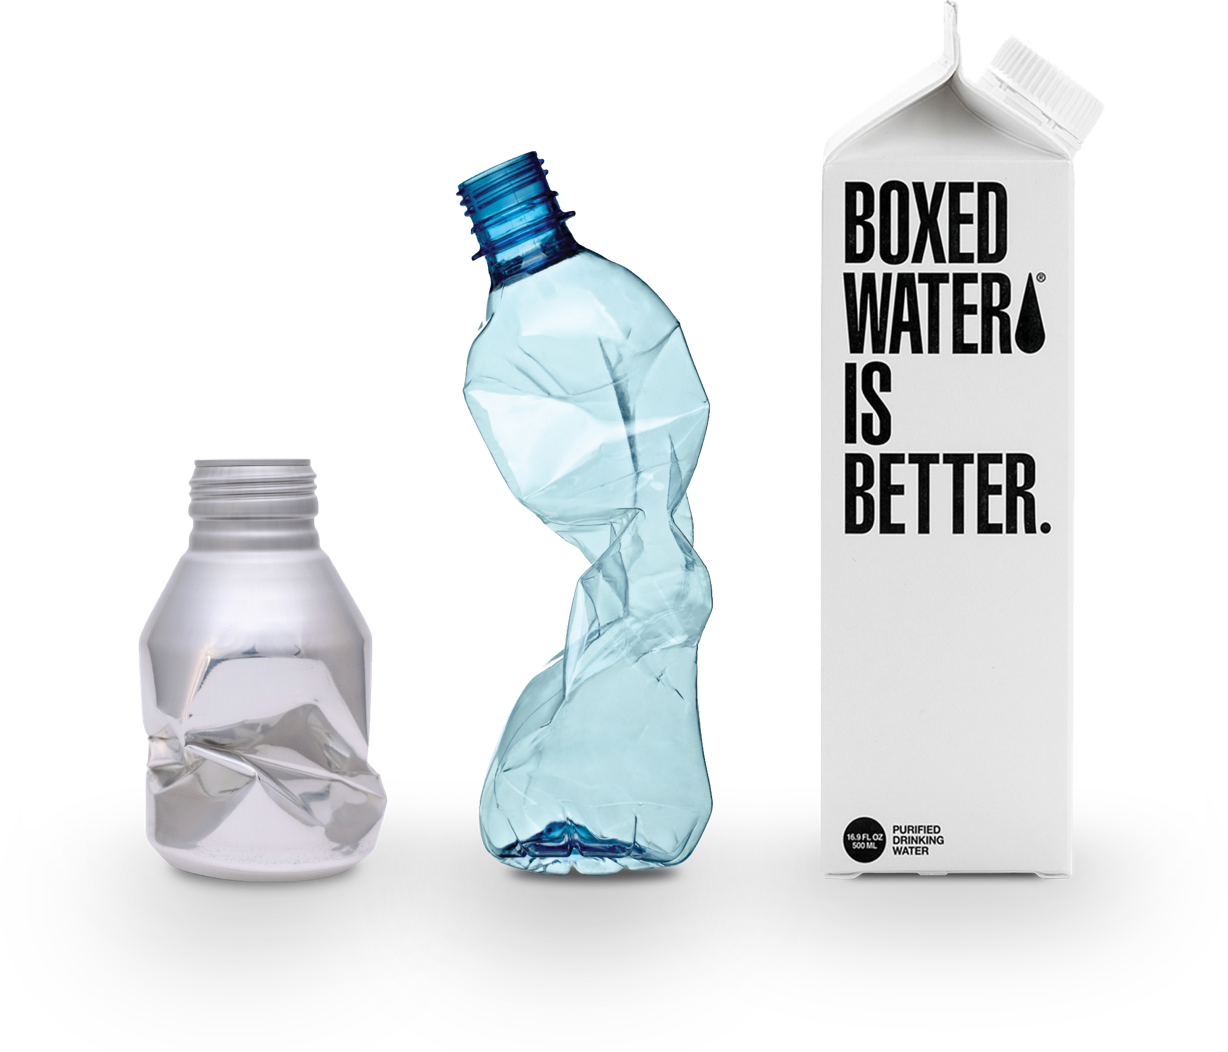 Boxed Water packaging is 100% recycled and recyclable and doesn’t contribute to plastic waste. 